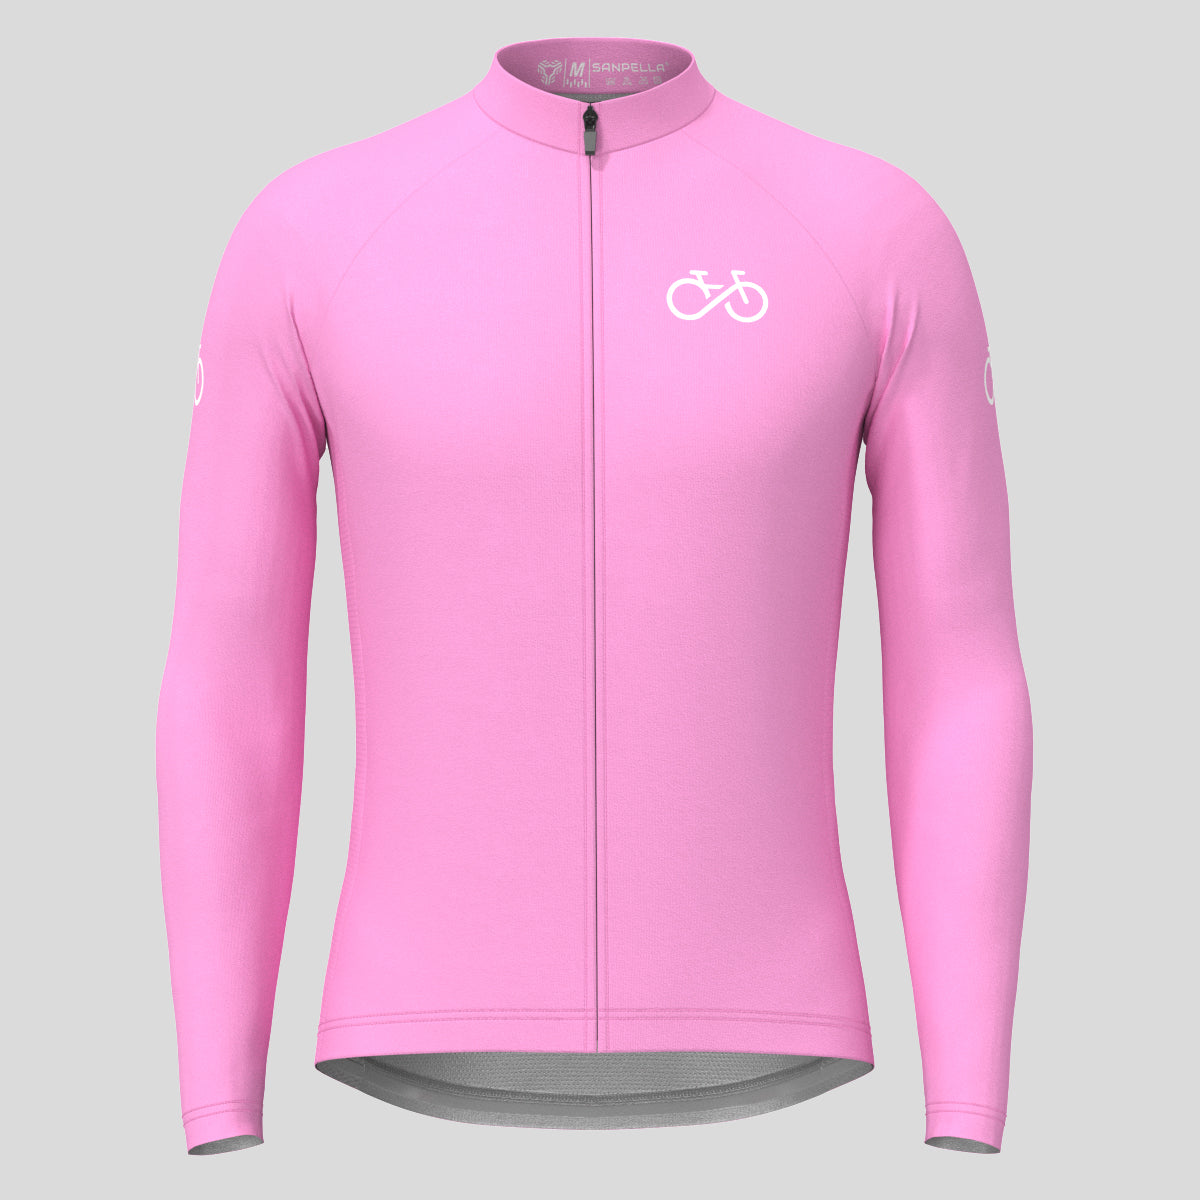 Men's Ride Forever LS Cycling Jersey - Neo Pink